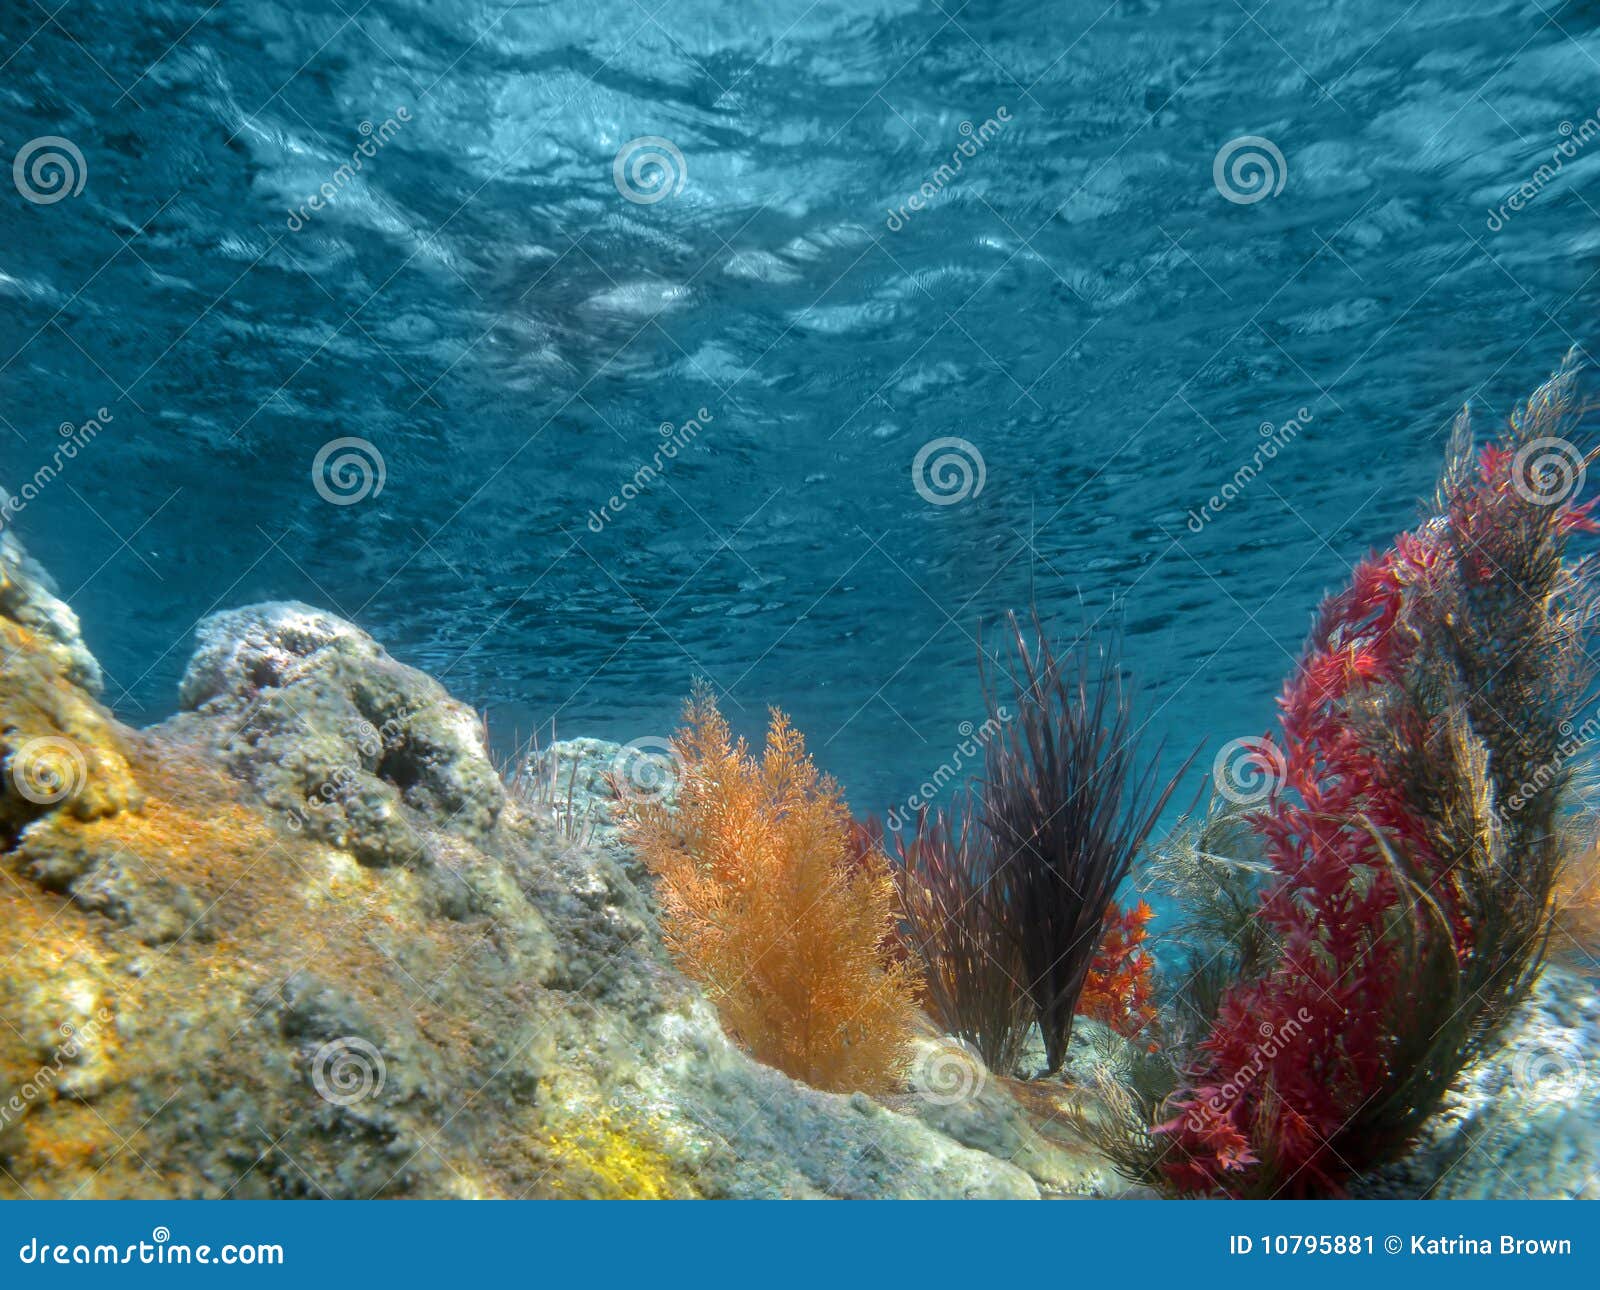 underwater view of the ocean with plants and coral